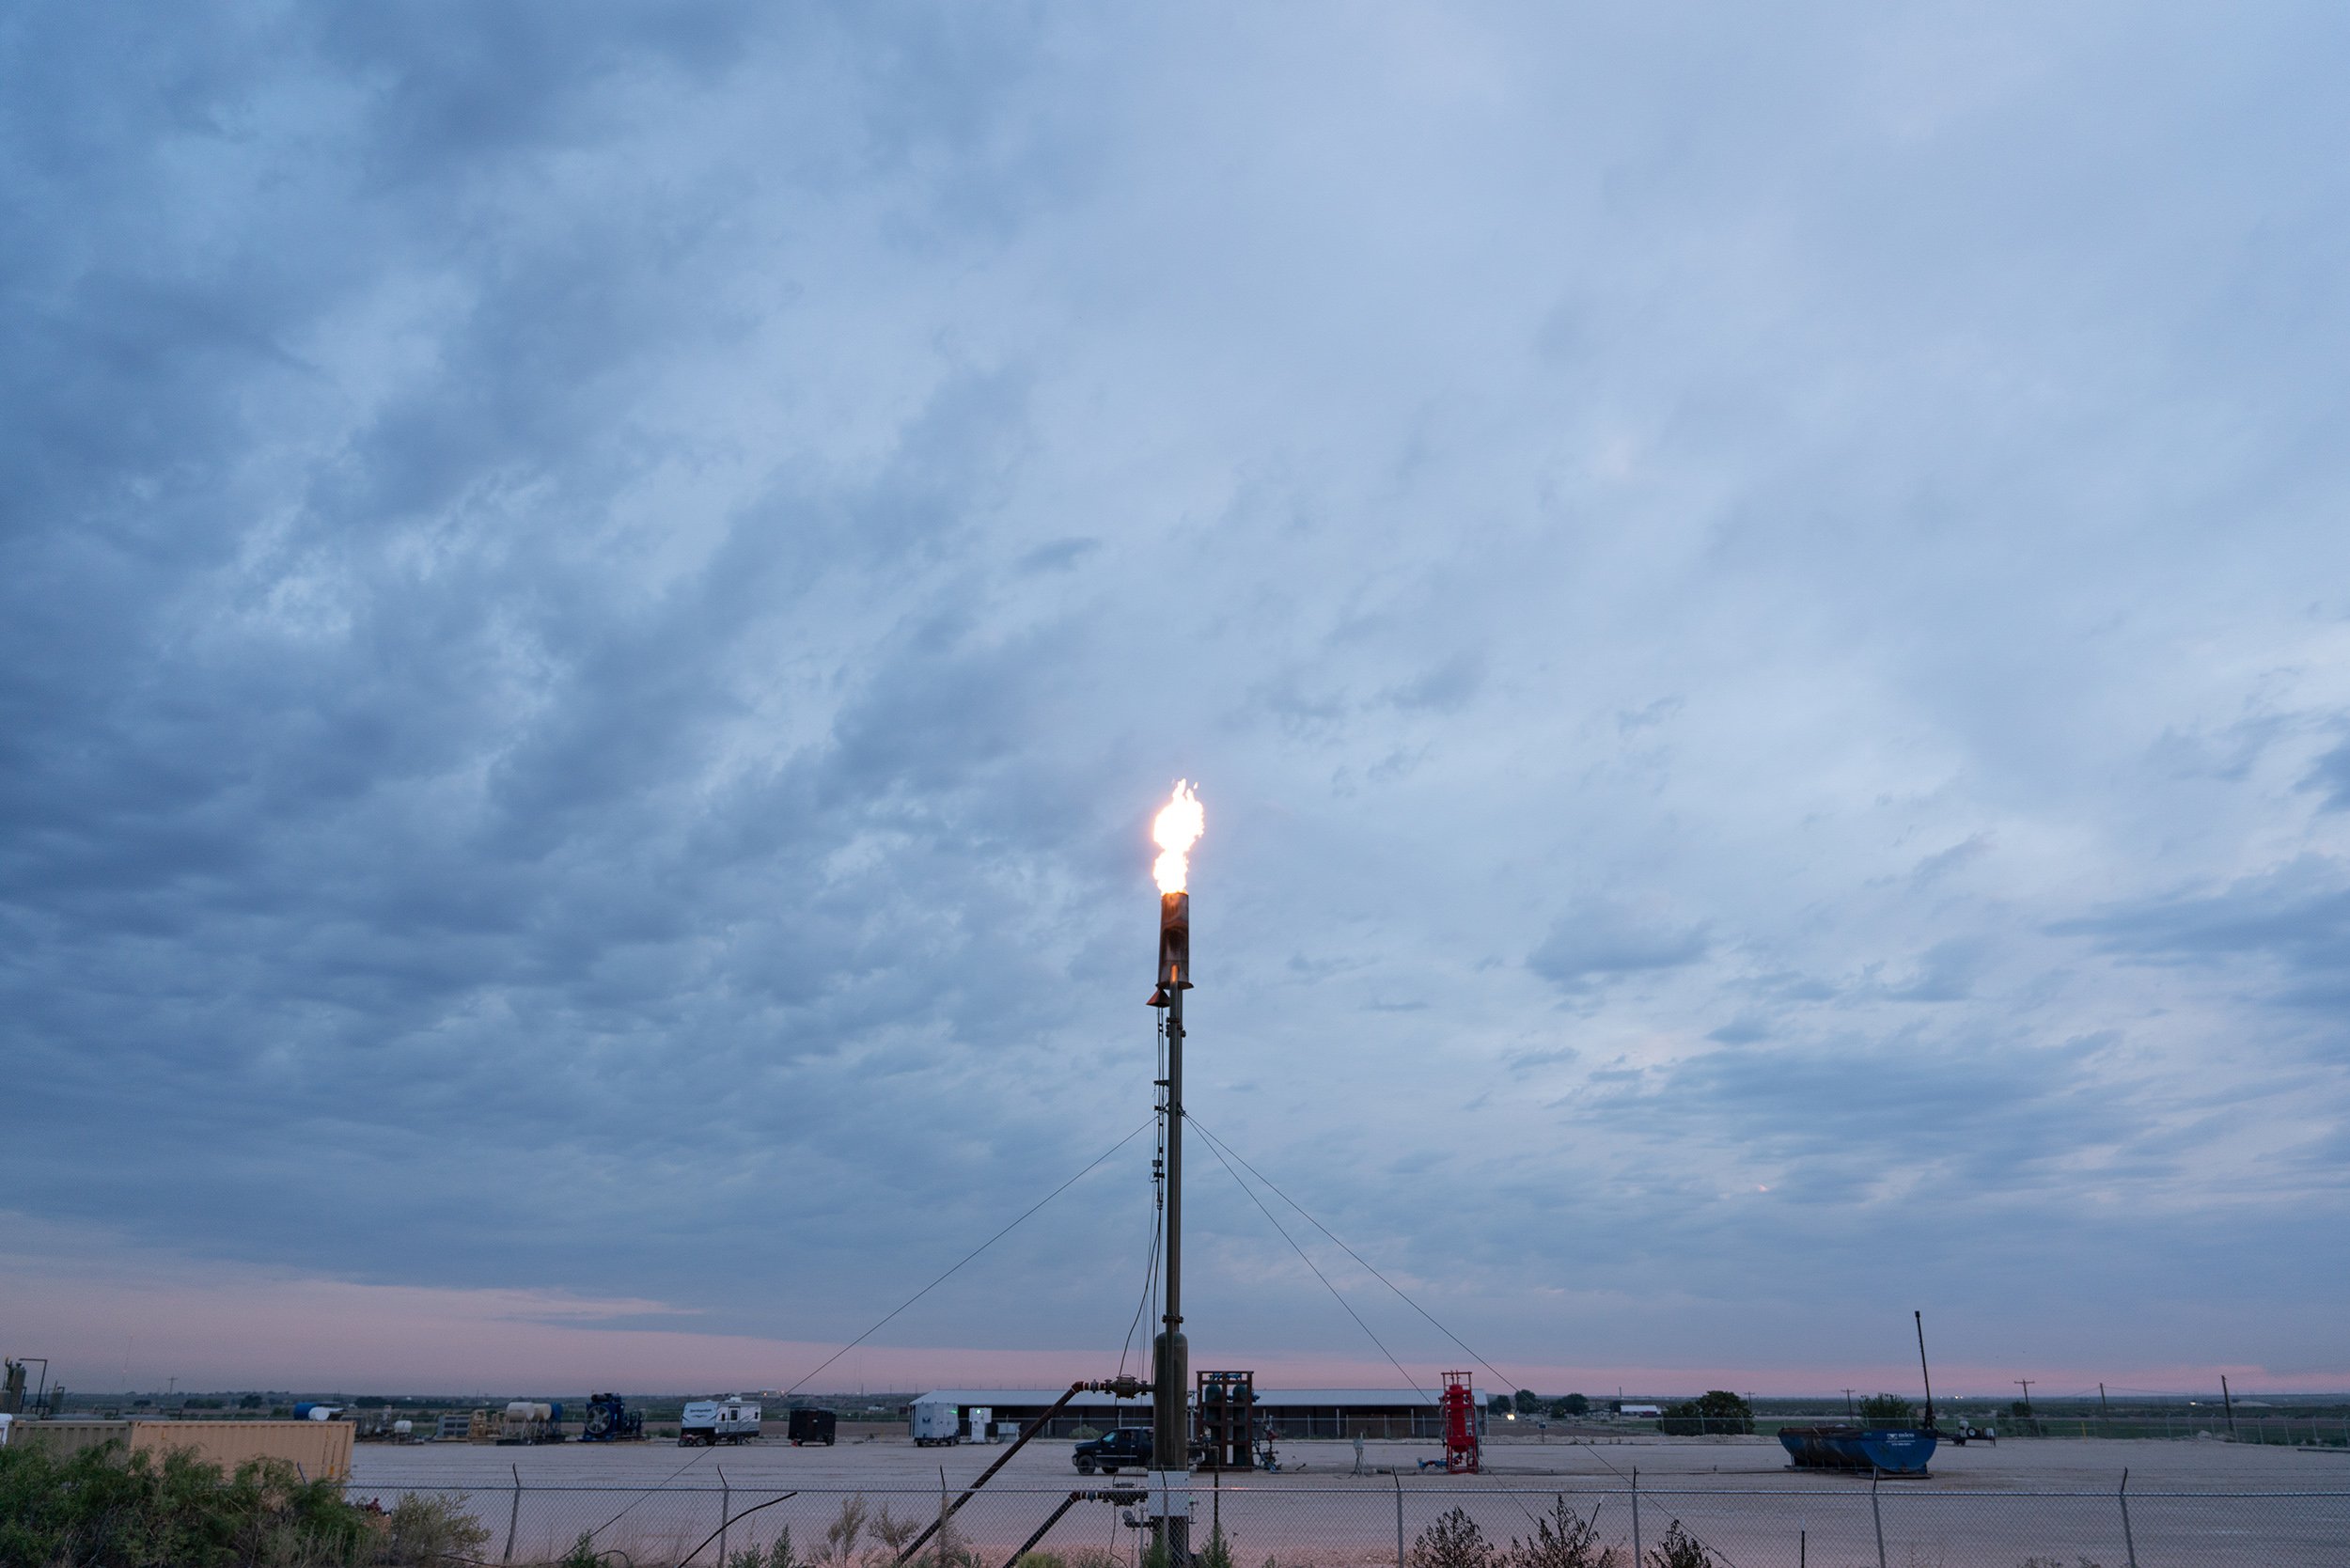 Oil and Gas Wells in the Permian Basin for the Center for Biological Diversity